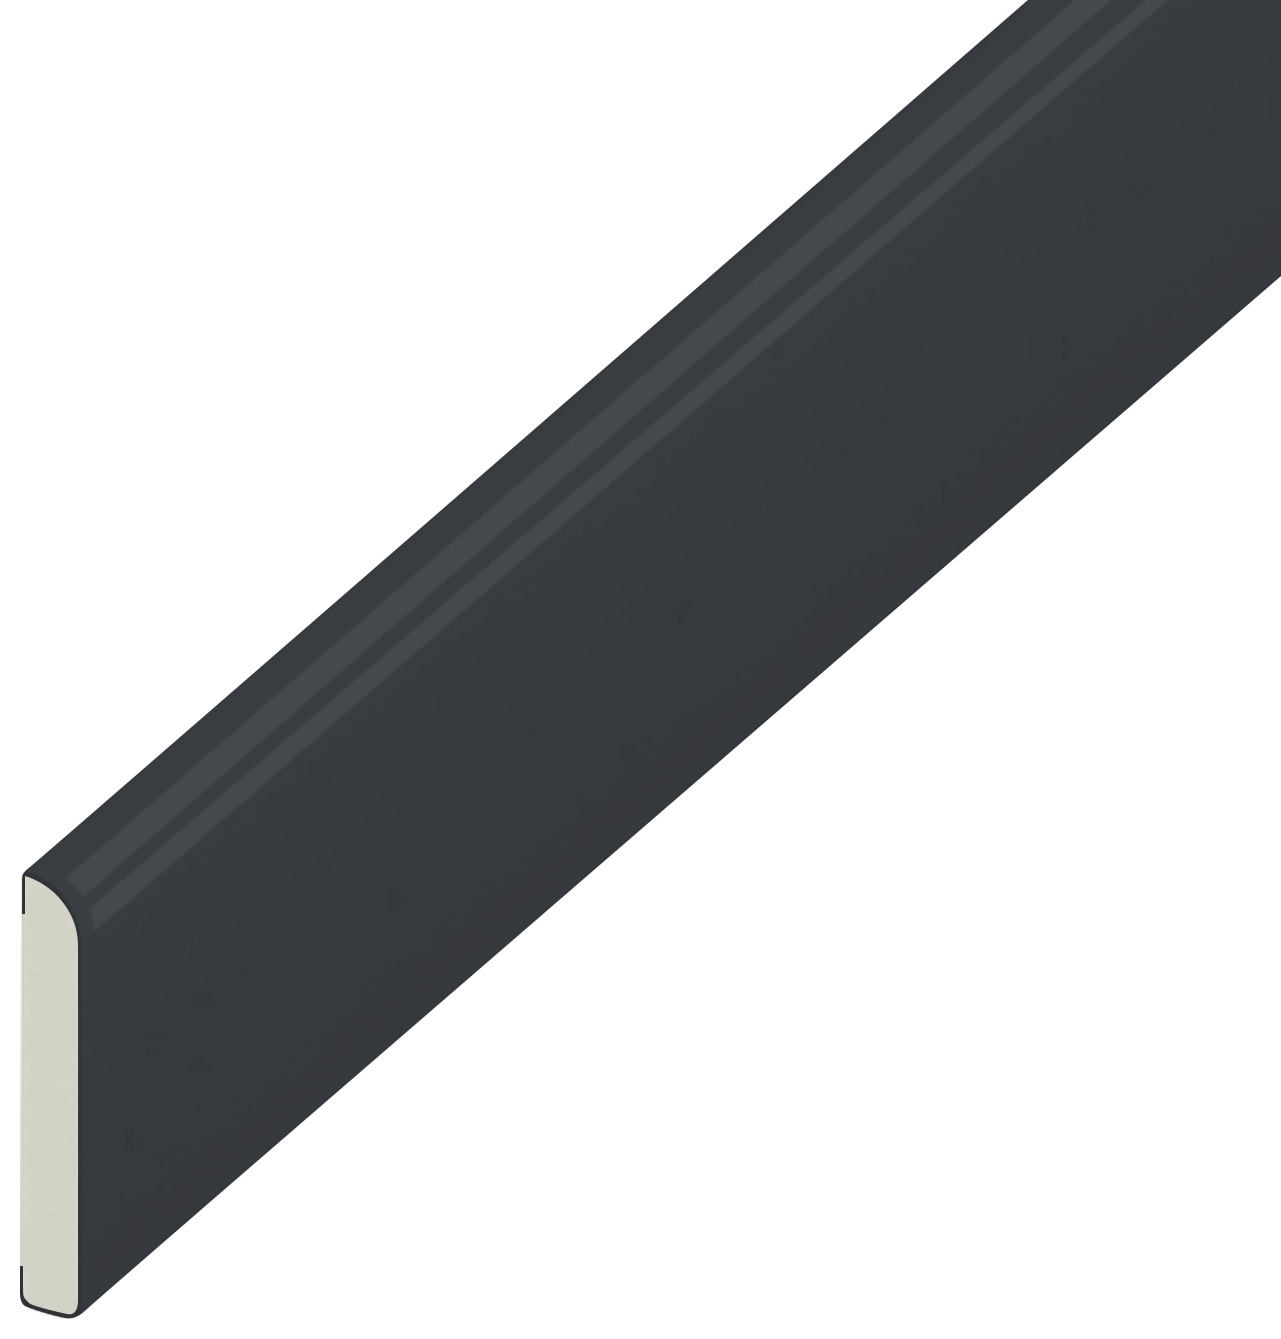 Wickes PVCu Anthracite Grey Cloaking Profile - 65mm x 2.5m - Pack of 5